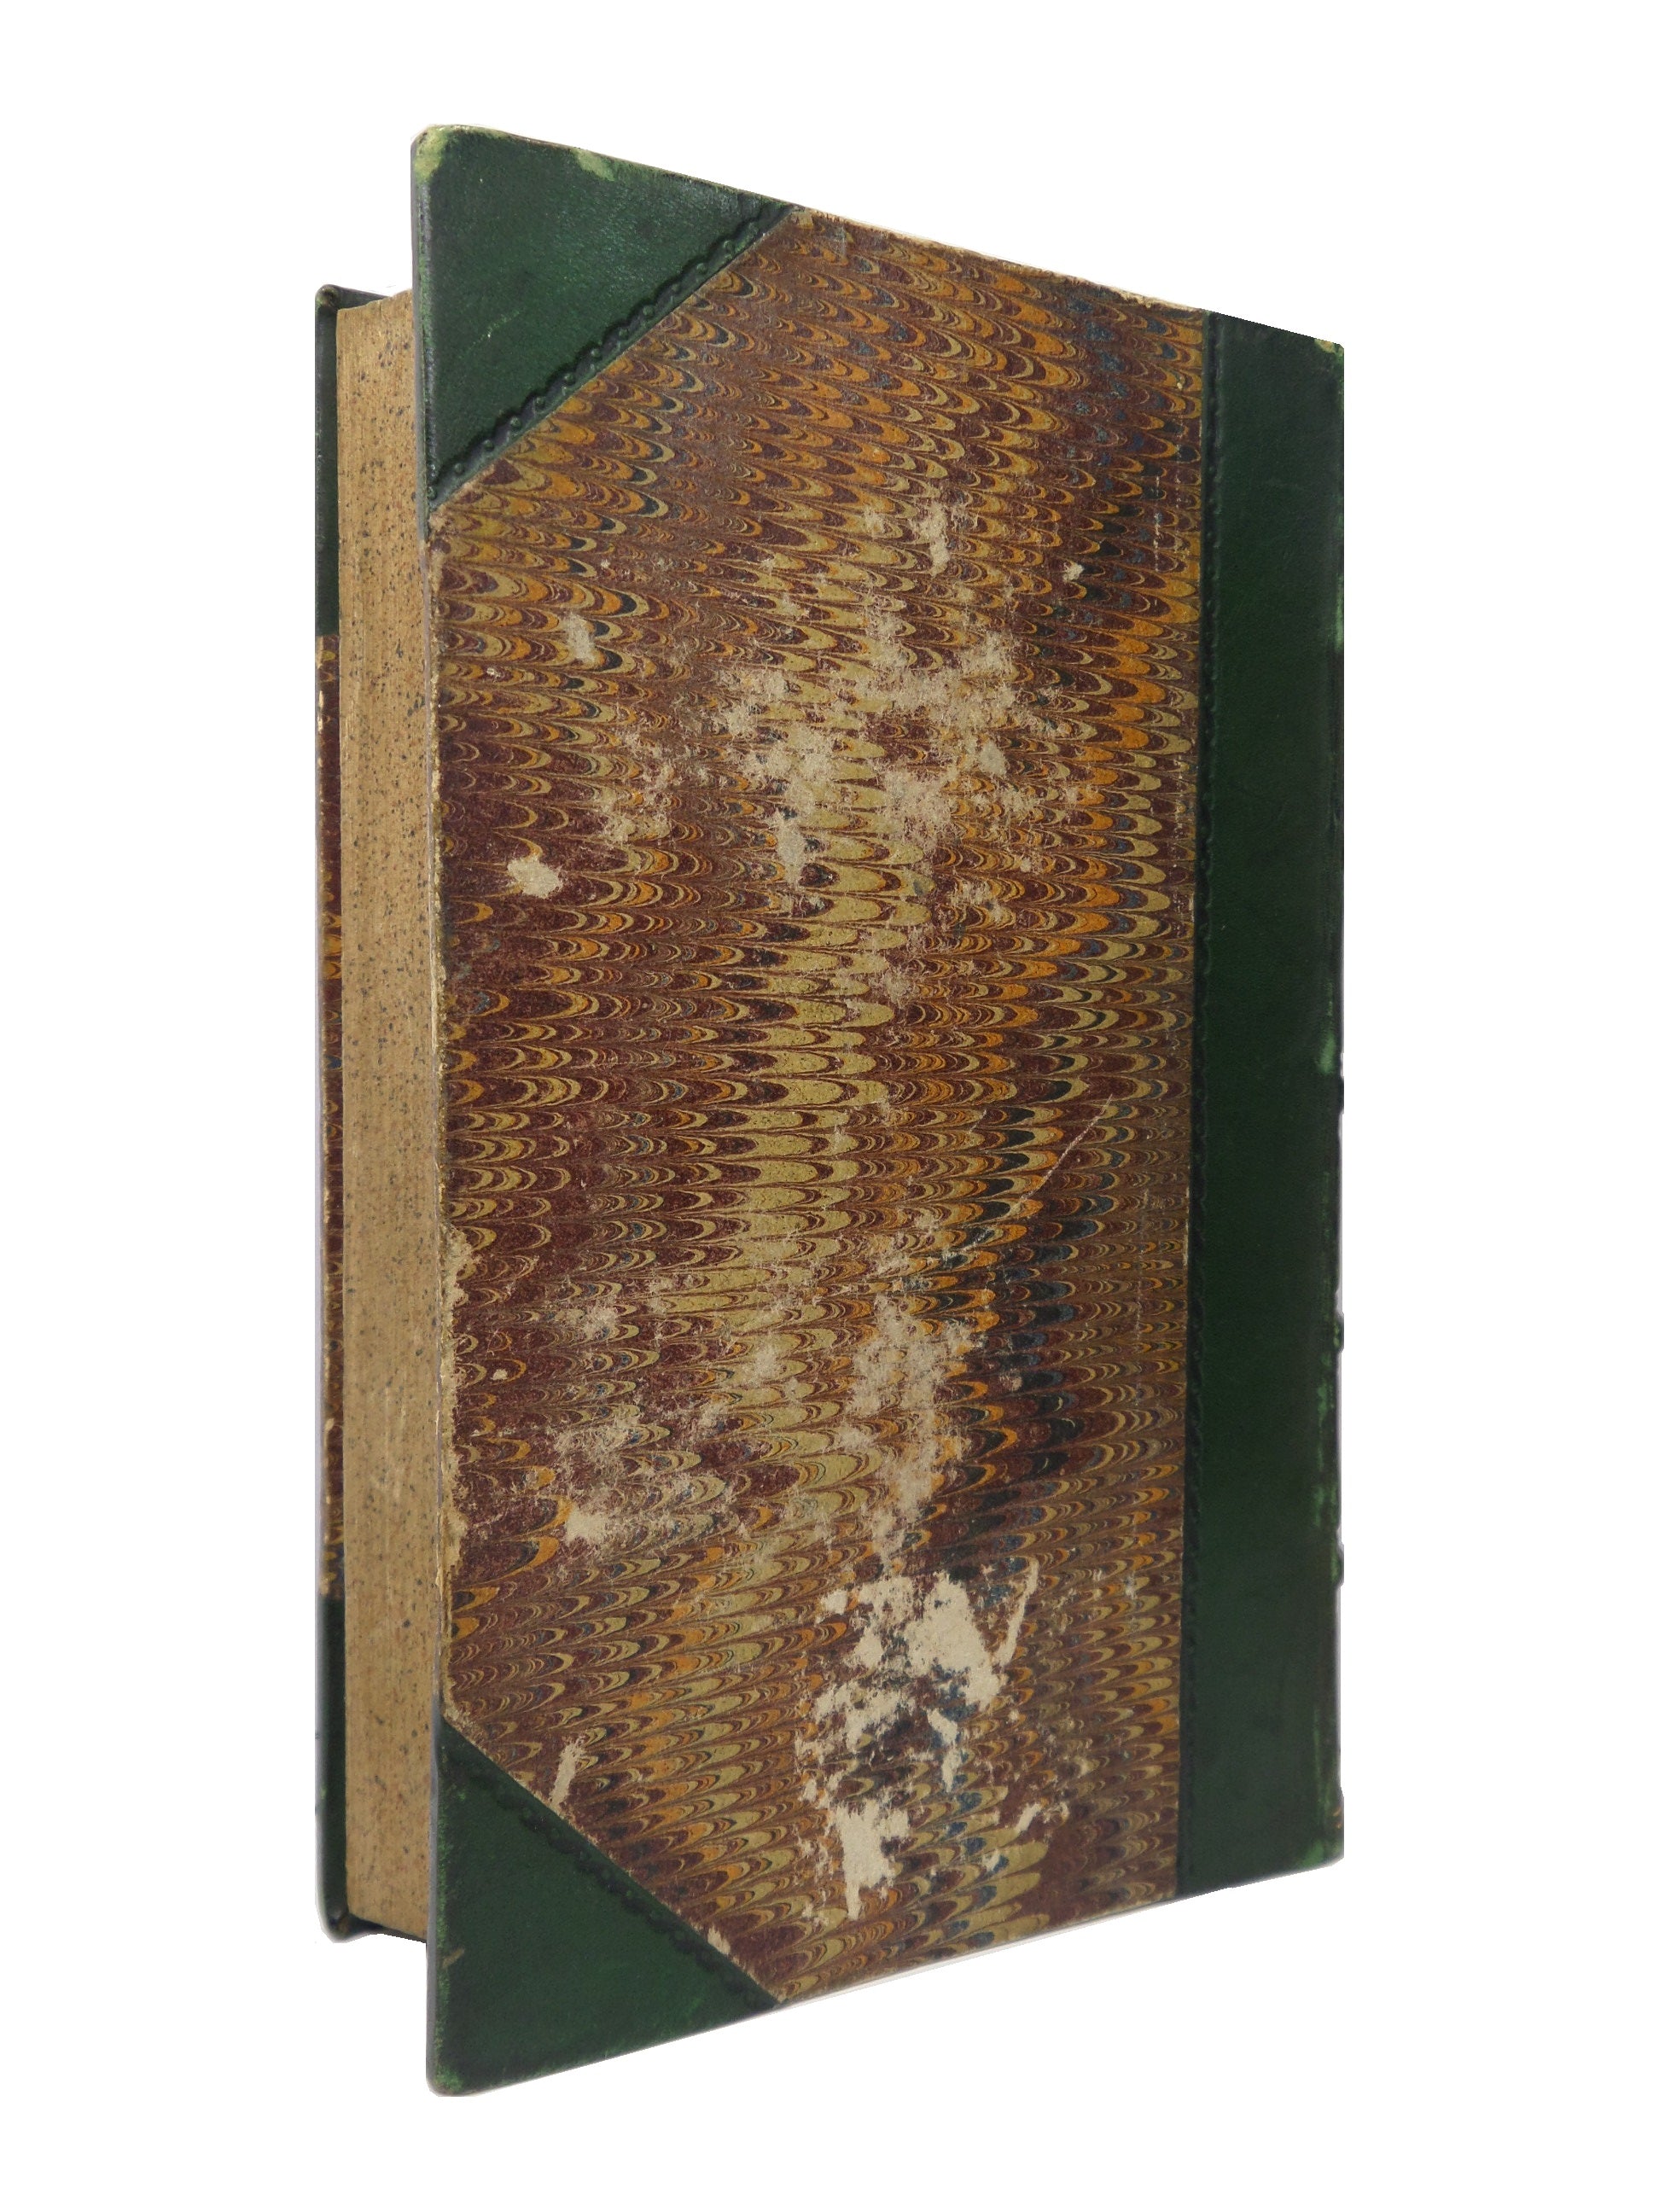 THE POETICAL WORKS OF JOHN MILTON CA.1840 LEATHER-BOUND